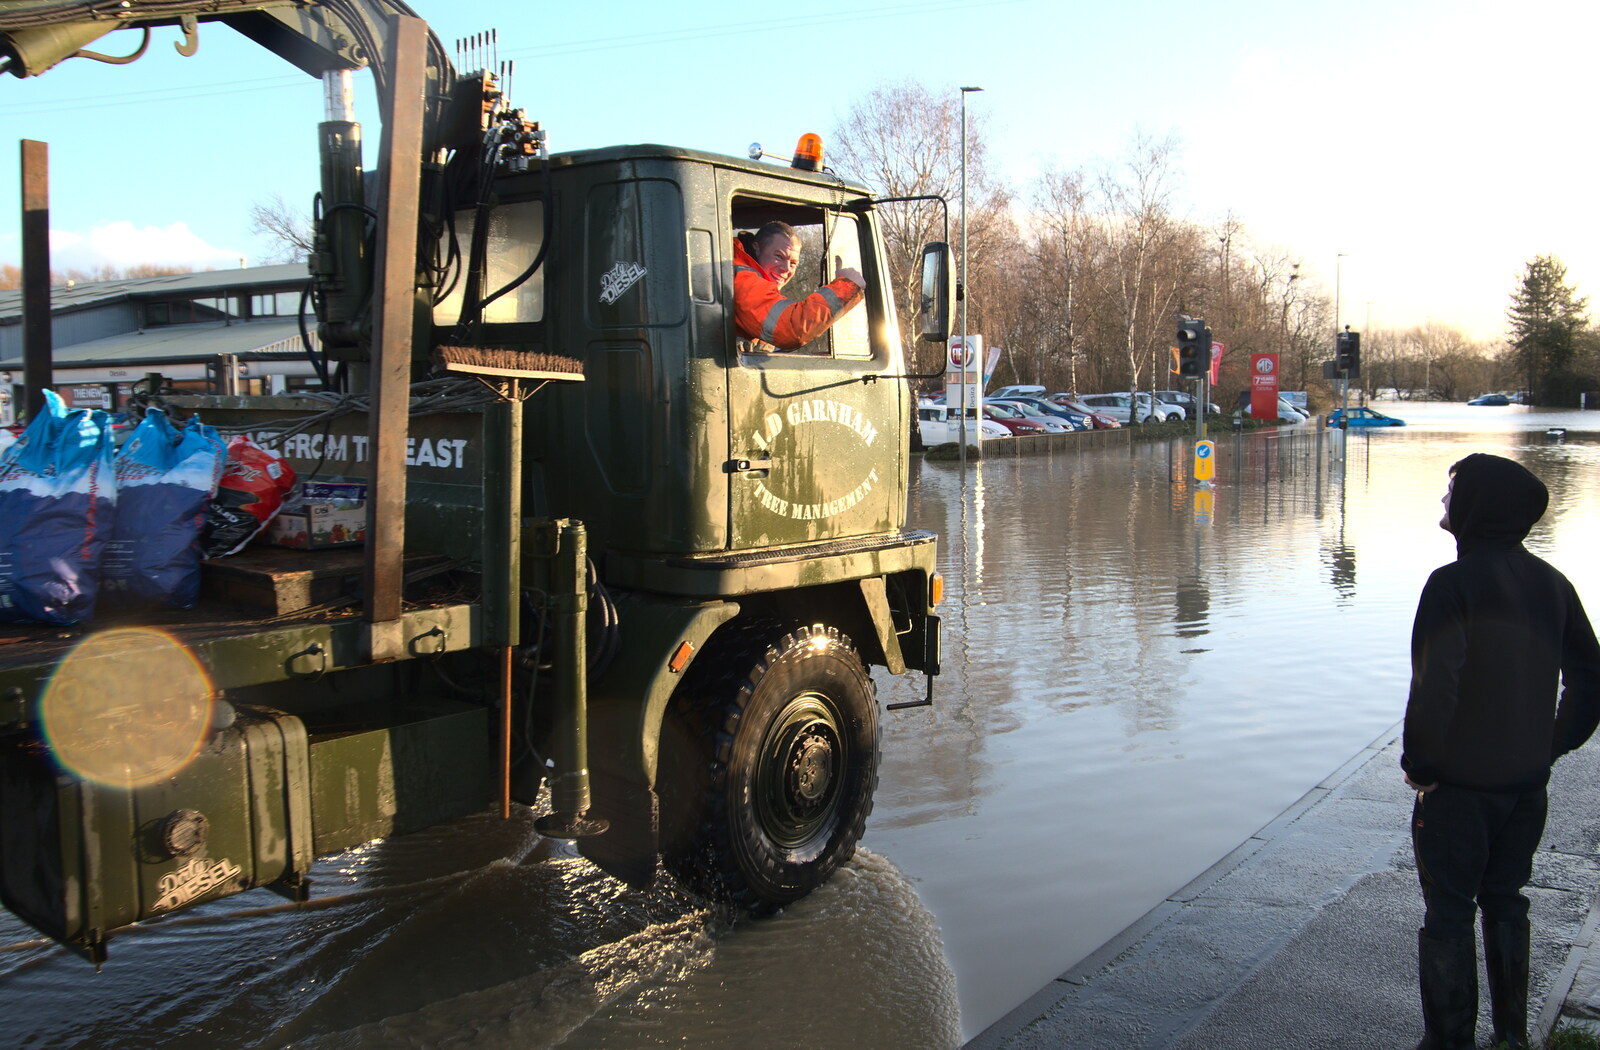 Thumbs-up from the Serious Loggin' driver from The Christmas Eve Floods, Diss, Norfolk - 24th December 2020